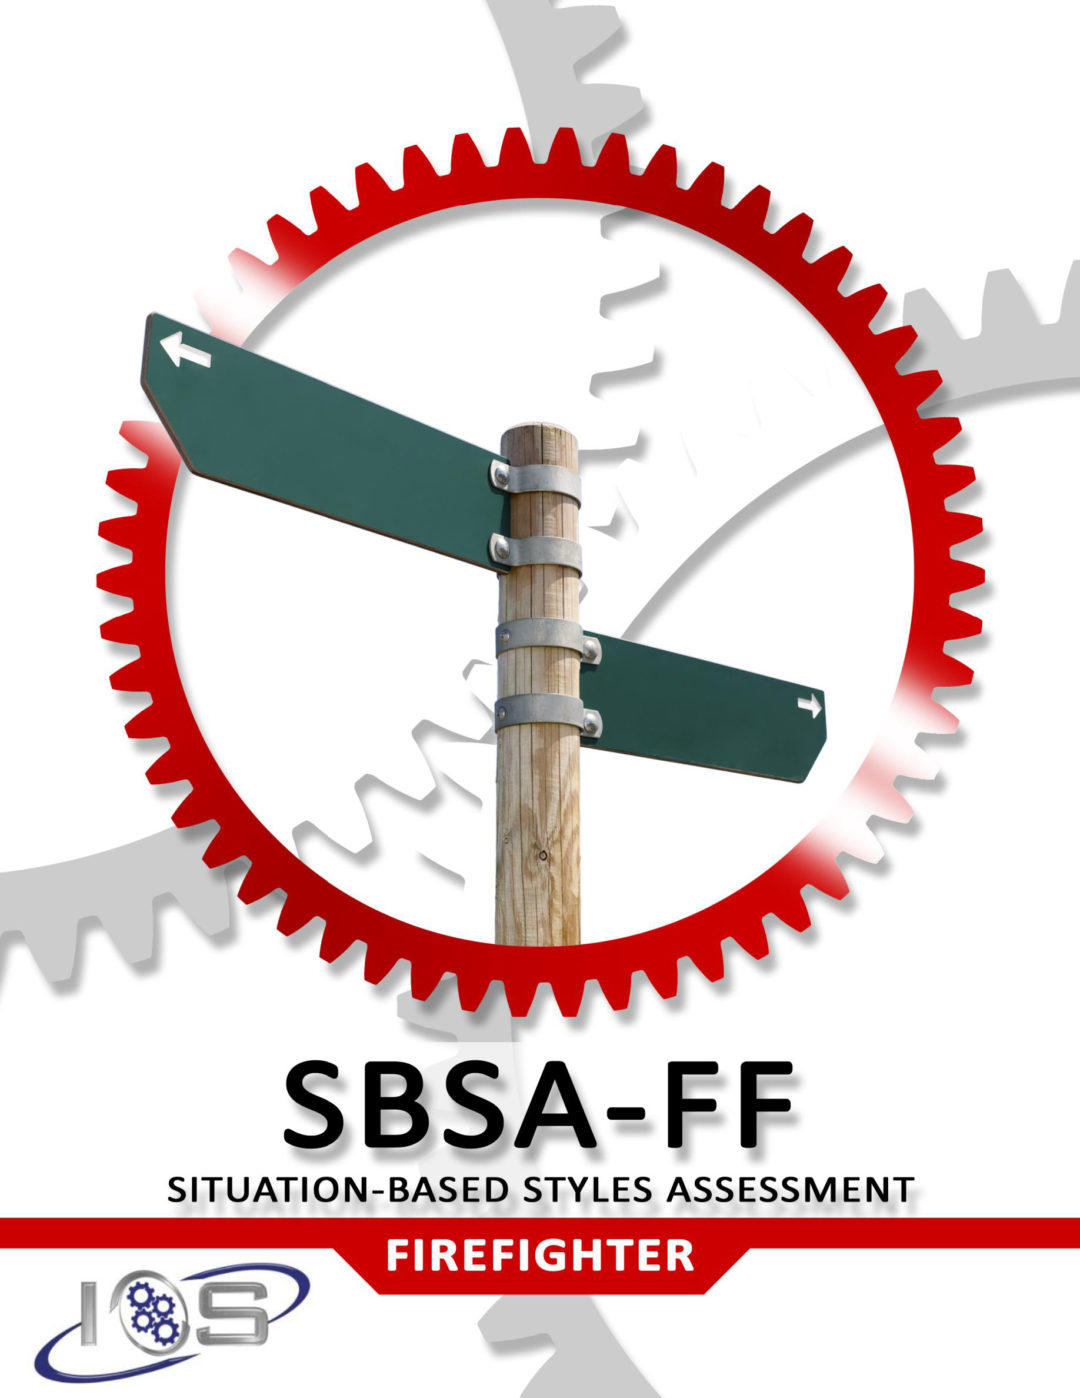 Situational-Based Styles Assessment for Firefighters – SBSA-FF